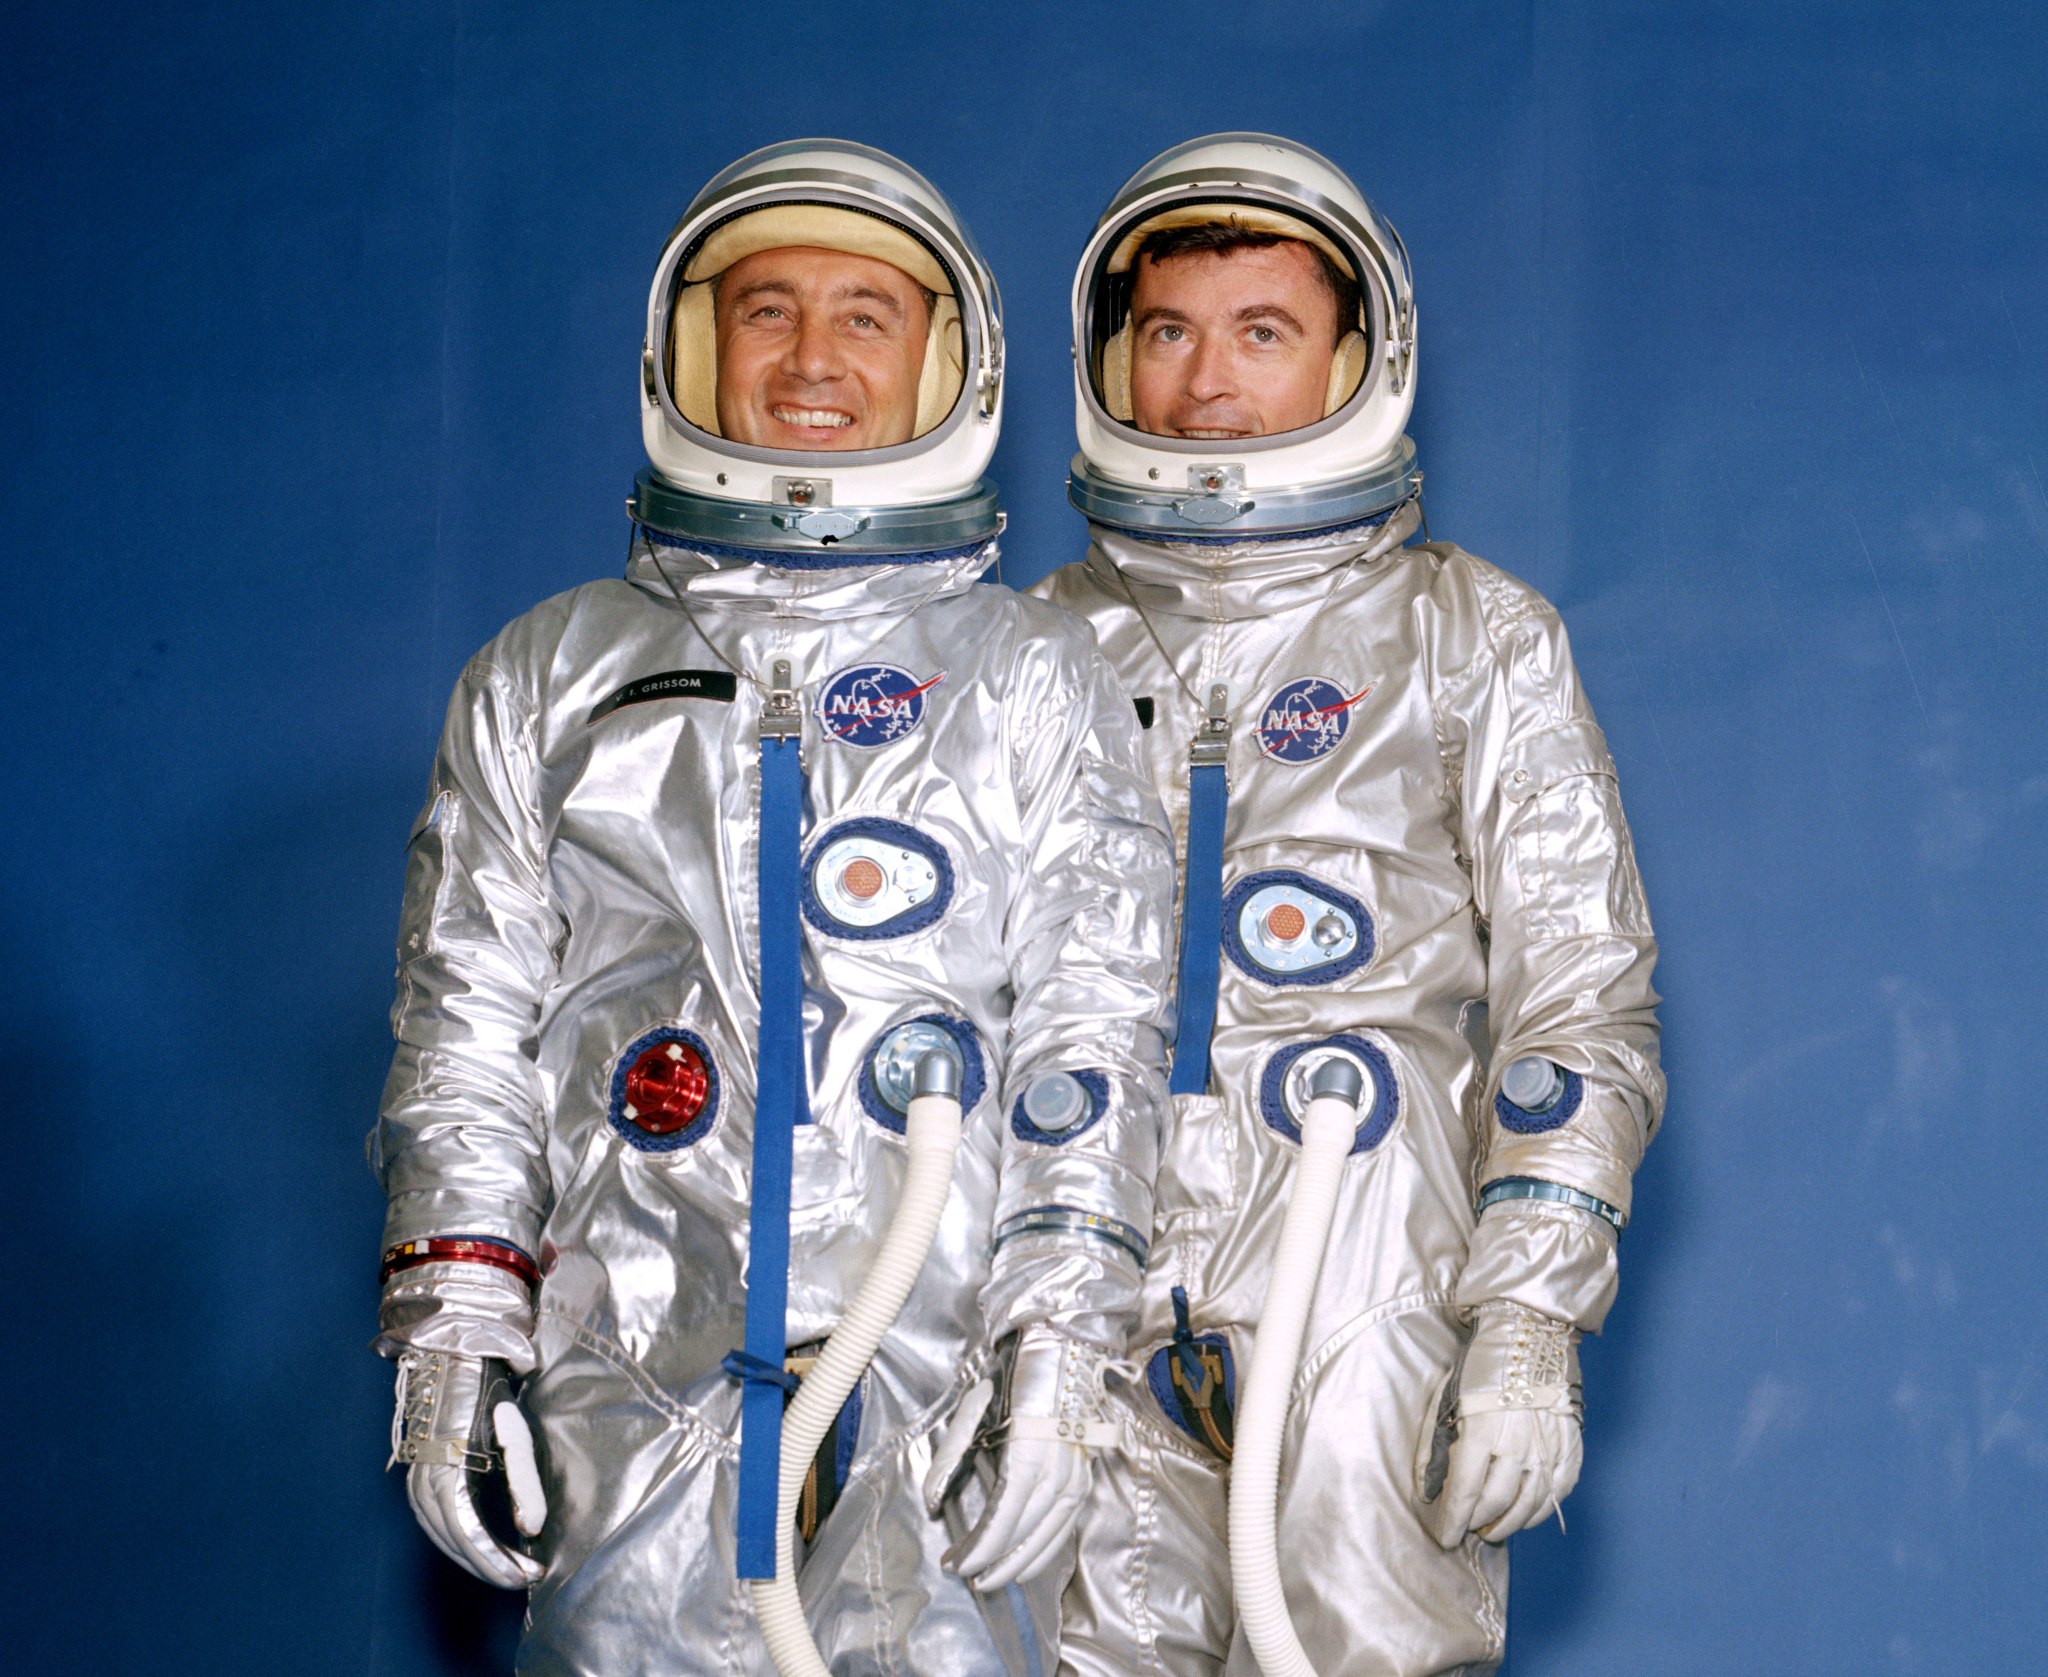 Gus Grissom and John Young in silver spacesuits from the Gemini program